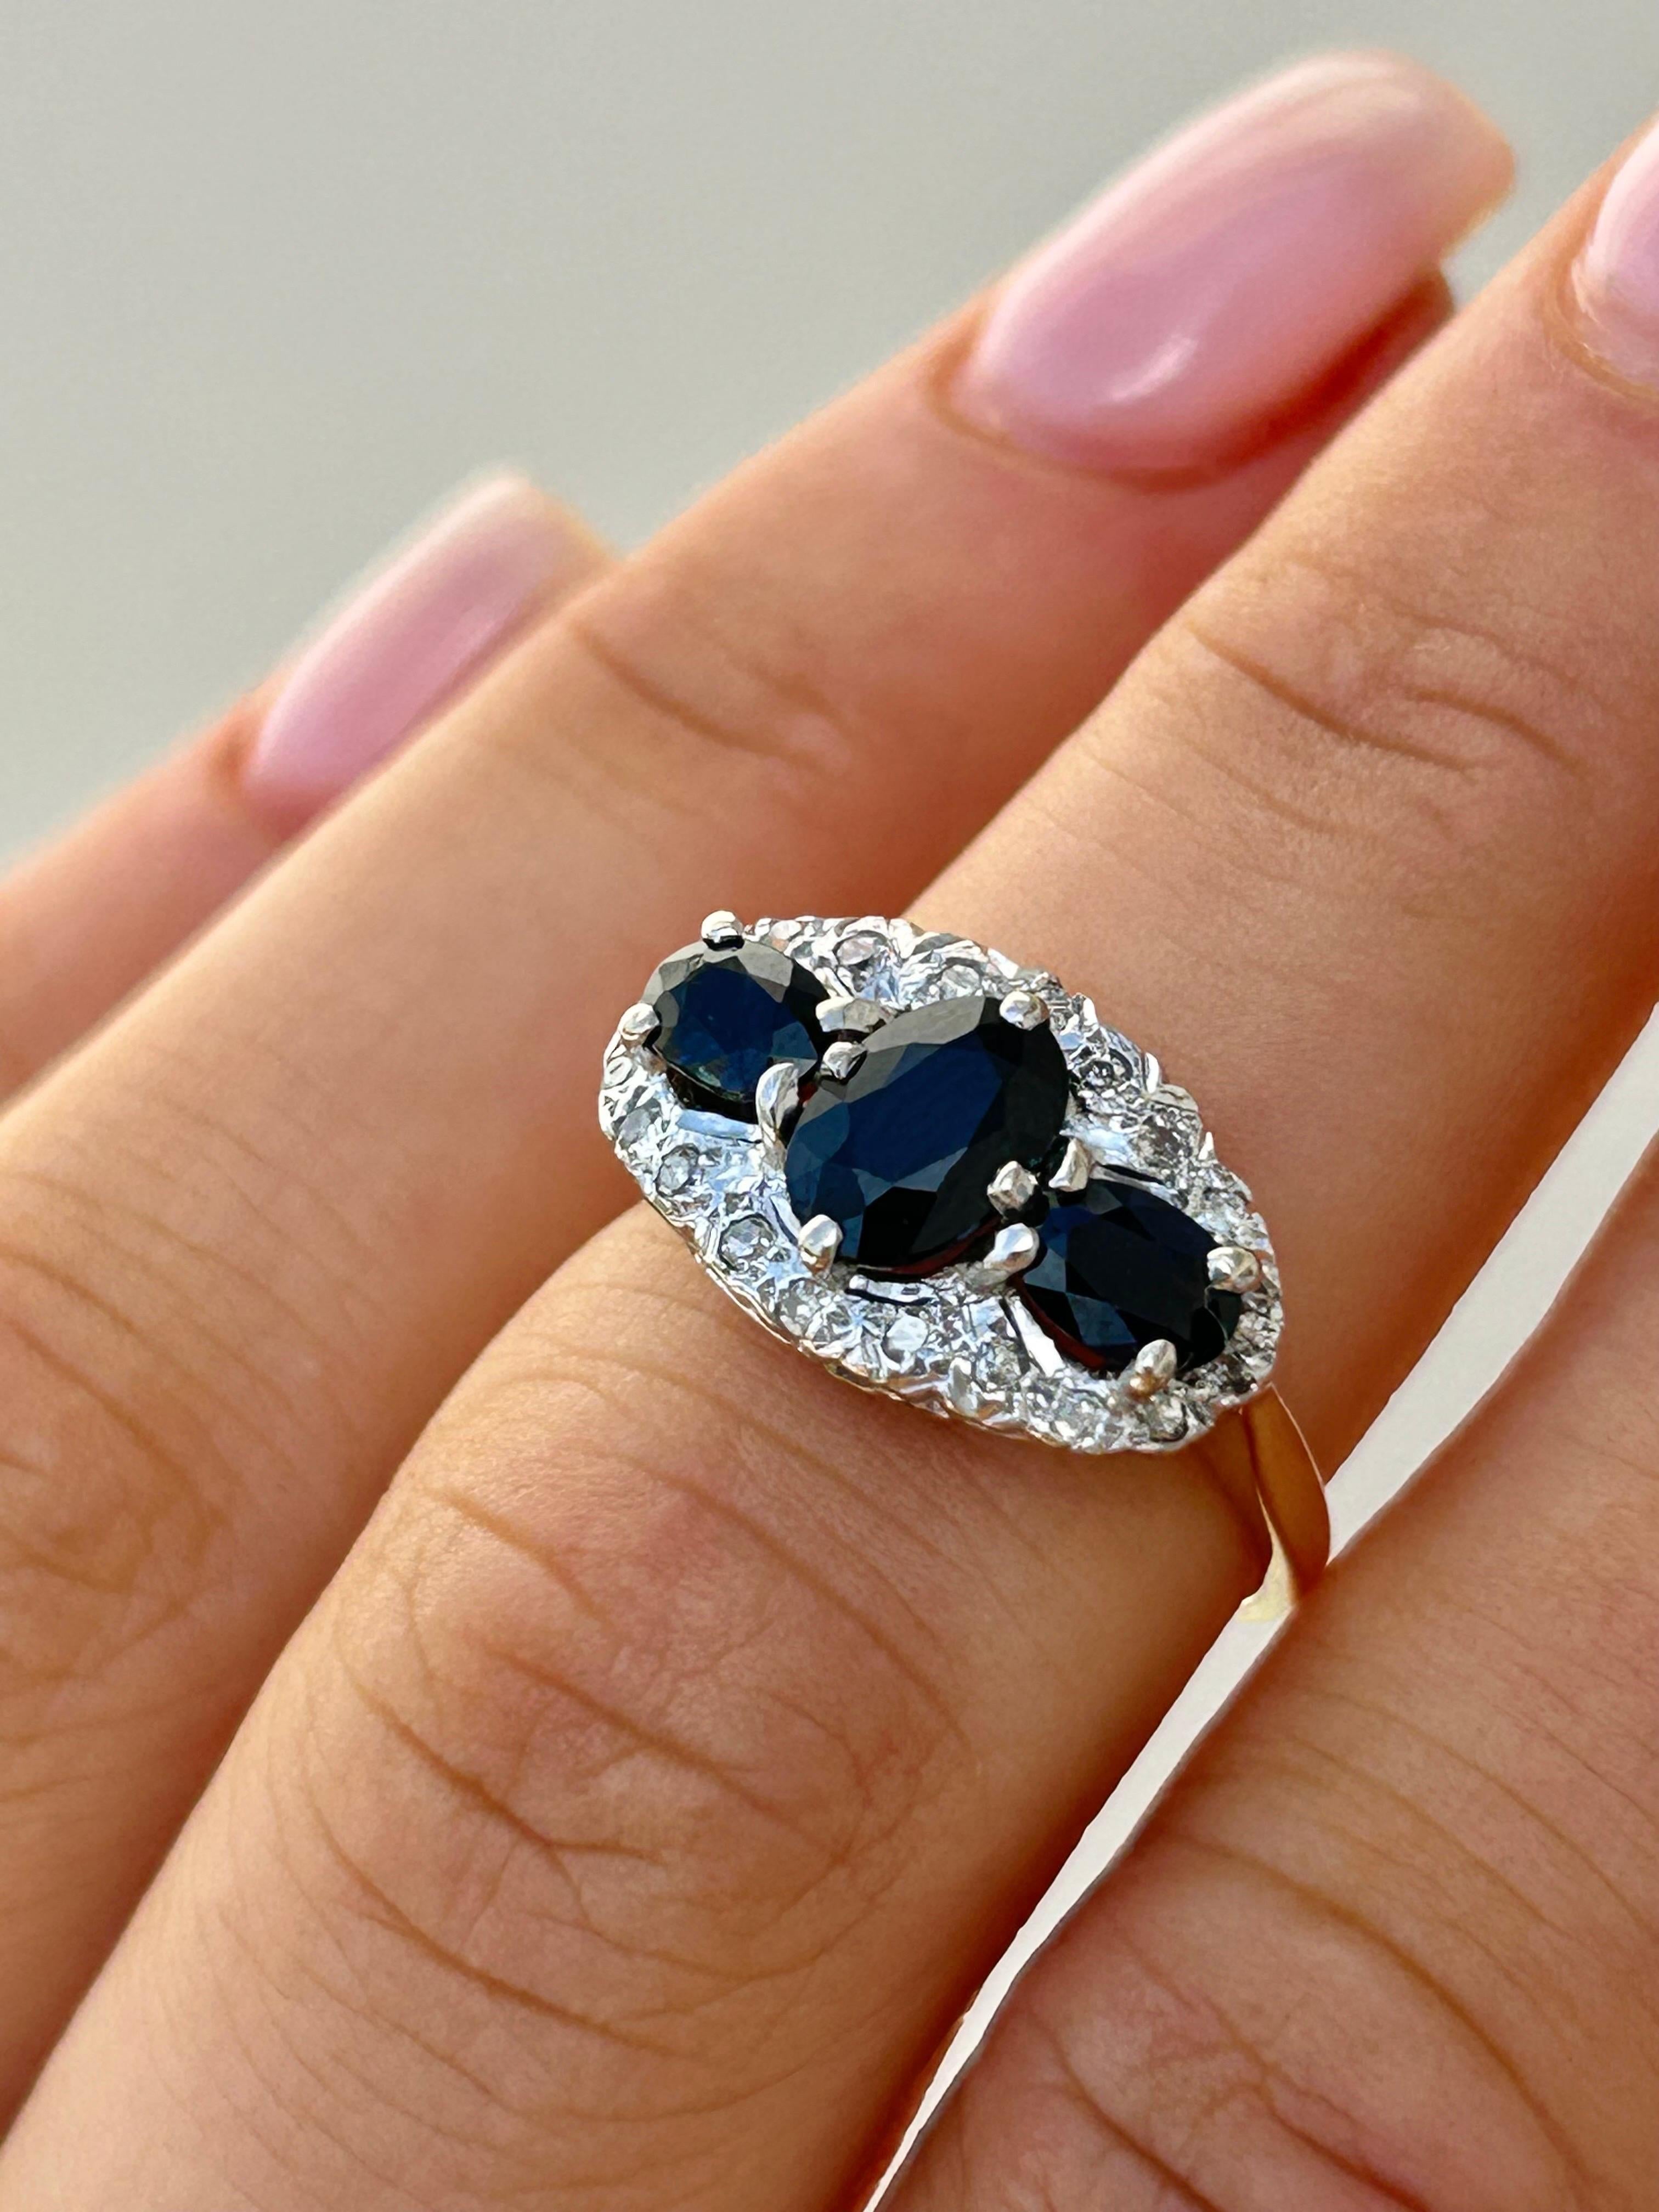 Vintage 18ct Yellow Gold Sapphire and Diamond Triple Halo Ring 

3 exquisite sapphire stone with diamonds surrounding, truly excellent 

The item comes without the box in the photos but will be presented in a gembank1973 gift box
 
Measurements: